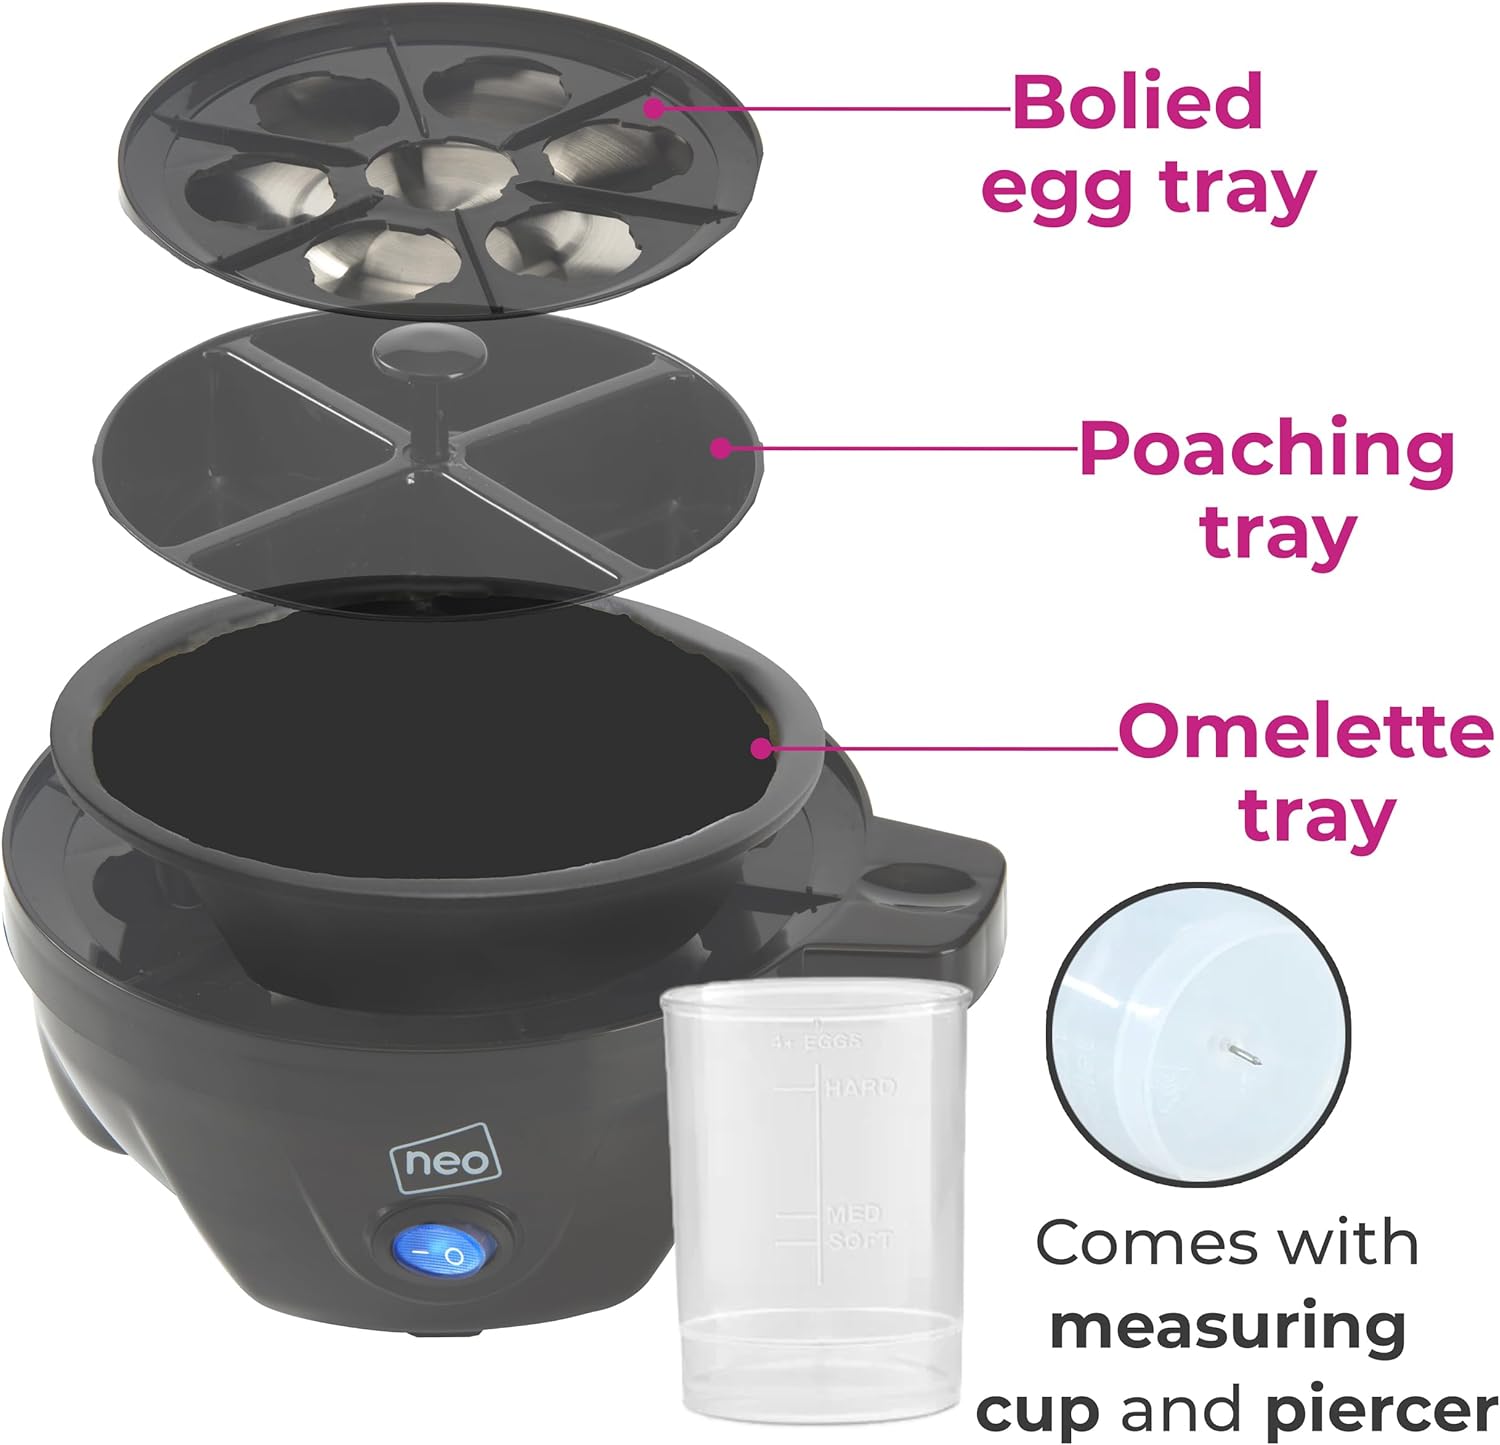 Neo 3 in 1 Durable Kitchen Electric Egg Cooker, Boiler, Poacher Poached Boiled & Omelette Maker Machine Steamer with Timer (Black and Silver) - Amazing Gadgets Outlet